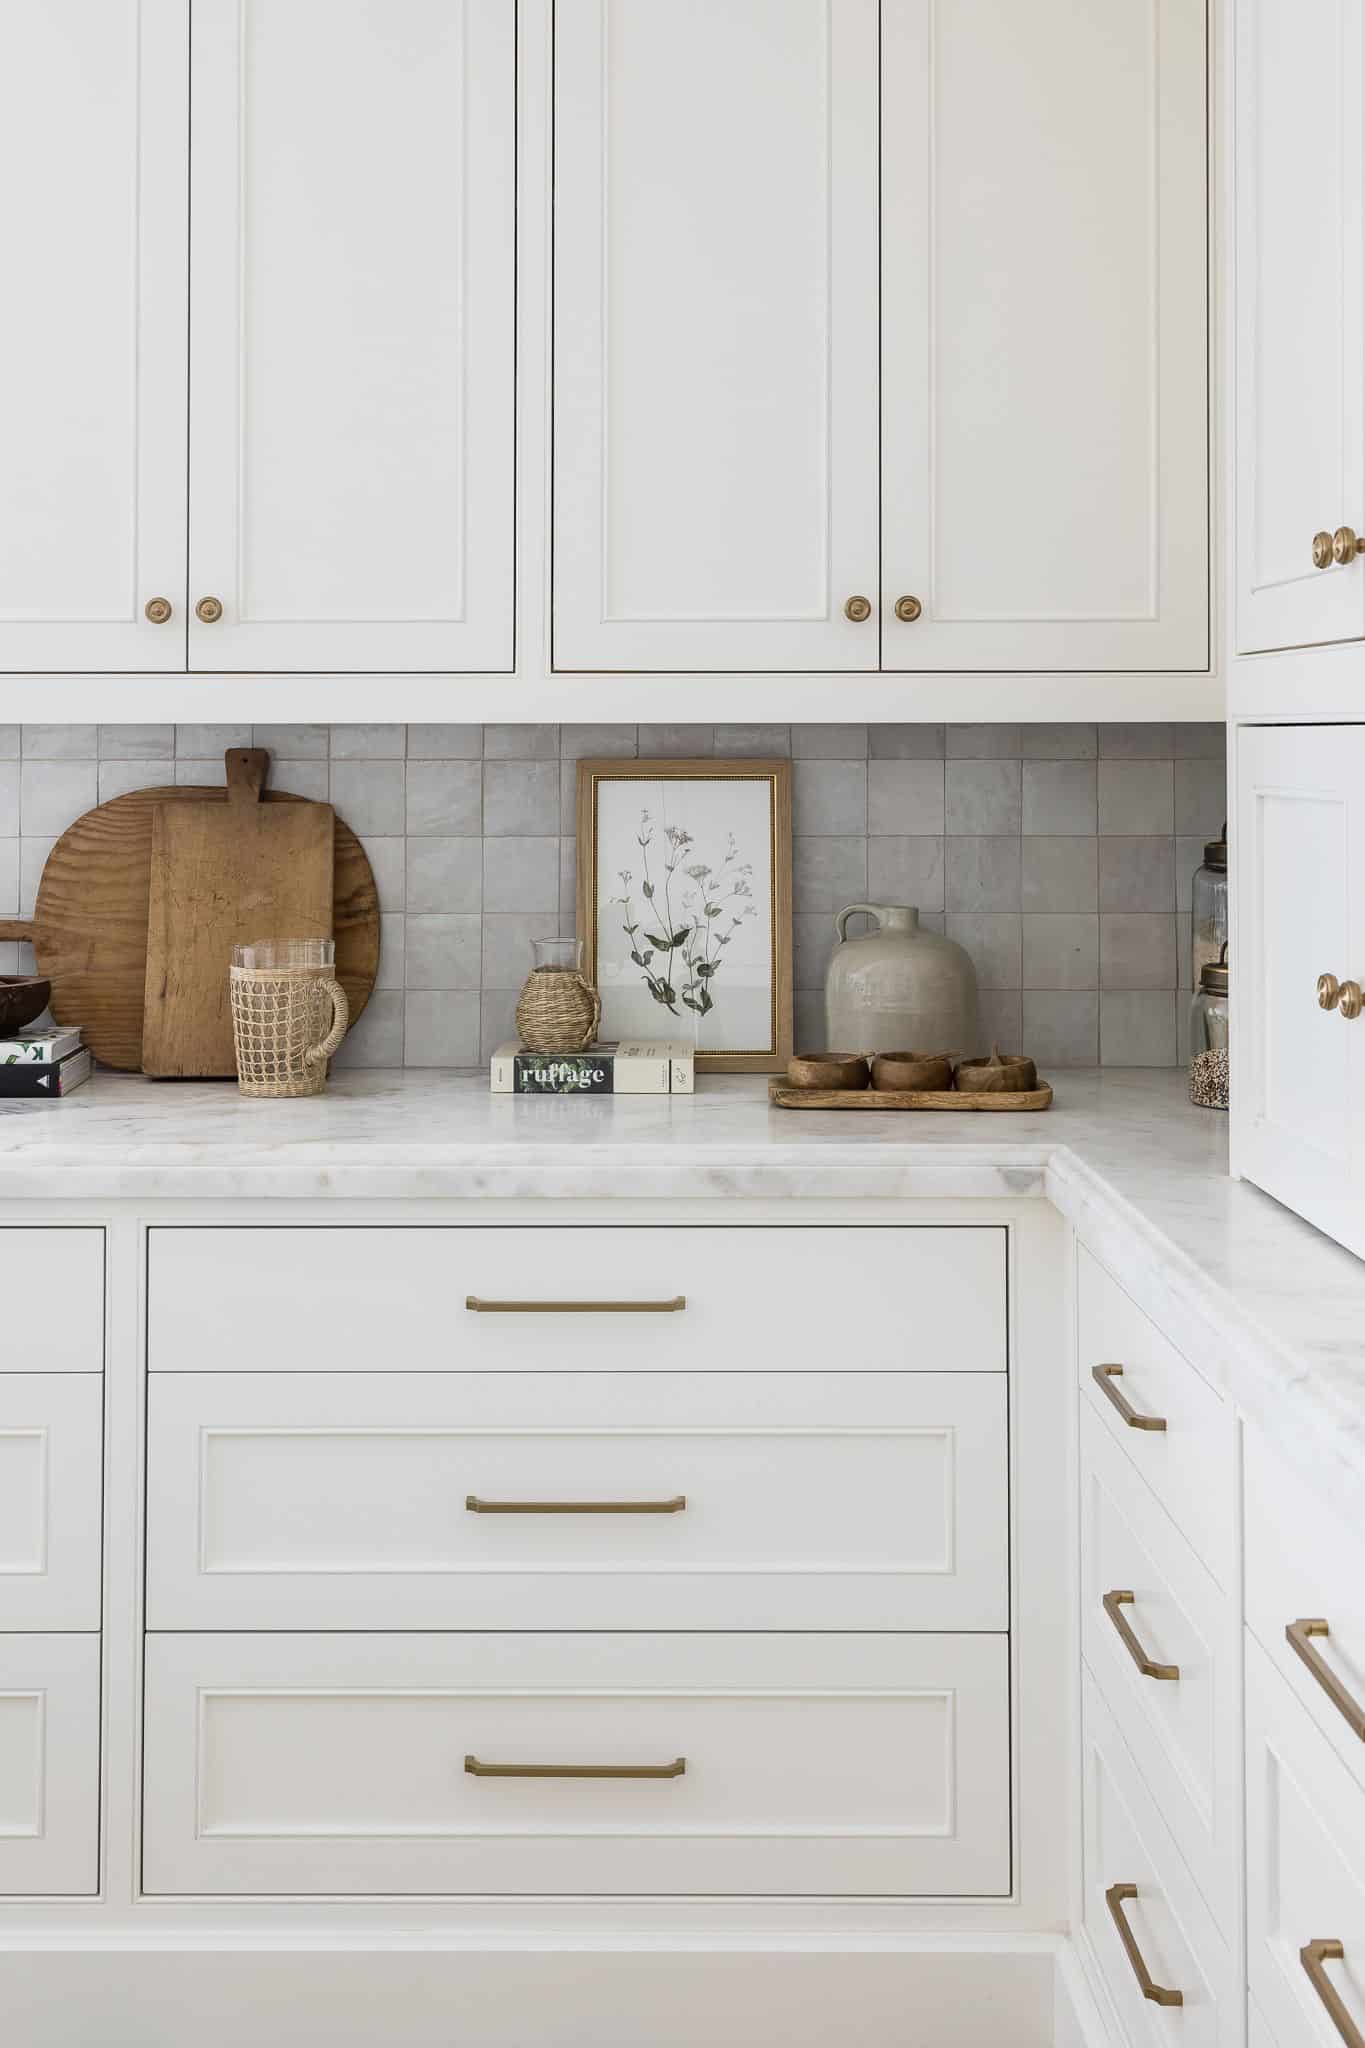 Home Reveal: Nellie Gail Kitchen - Mindy Gayer Design Co.